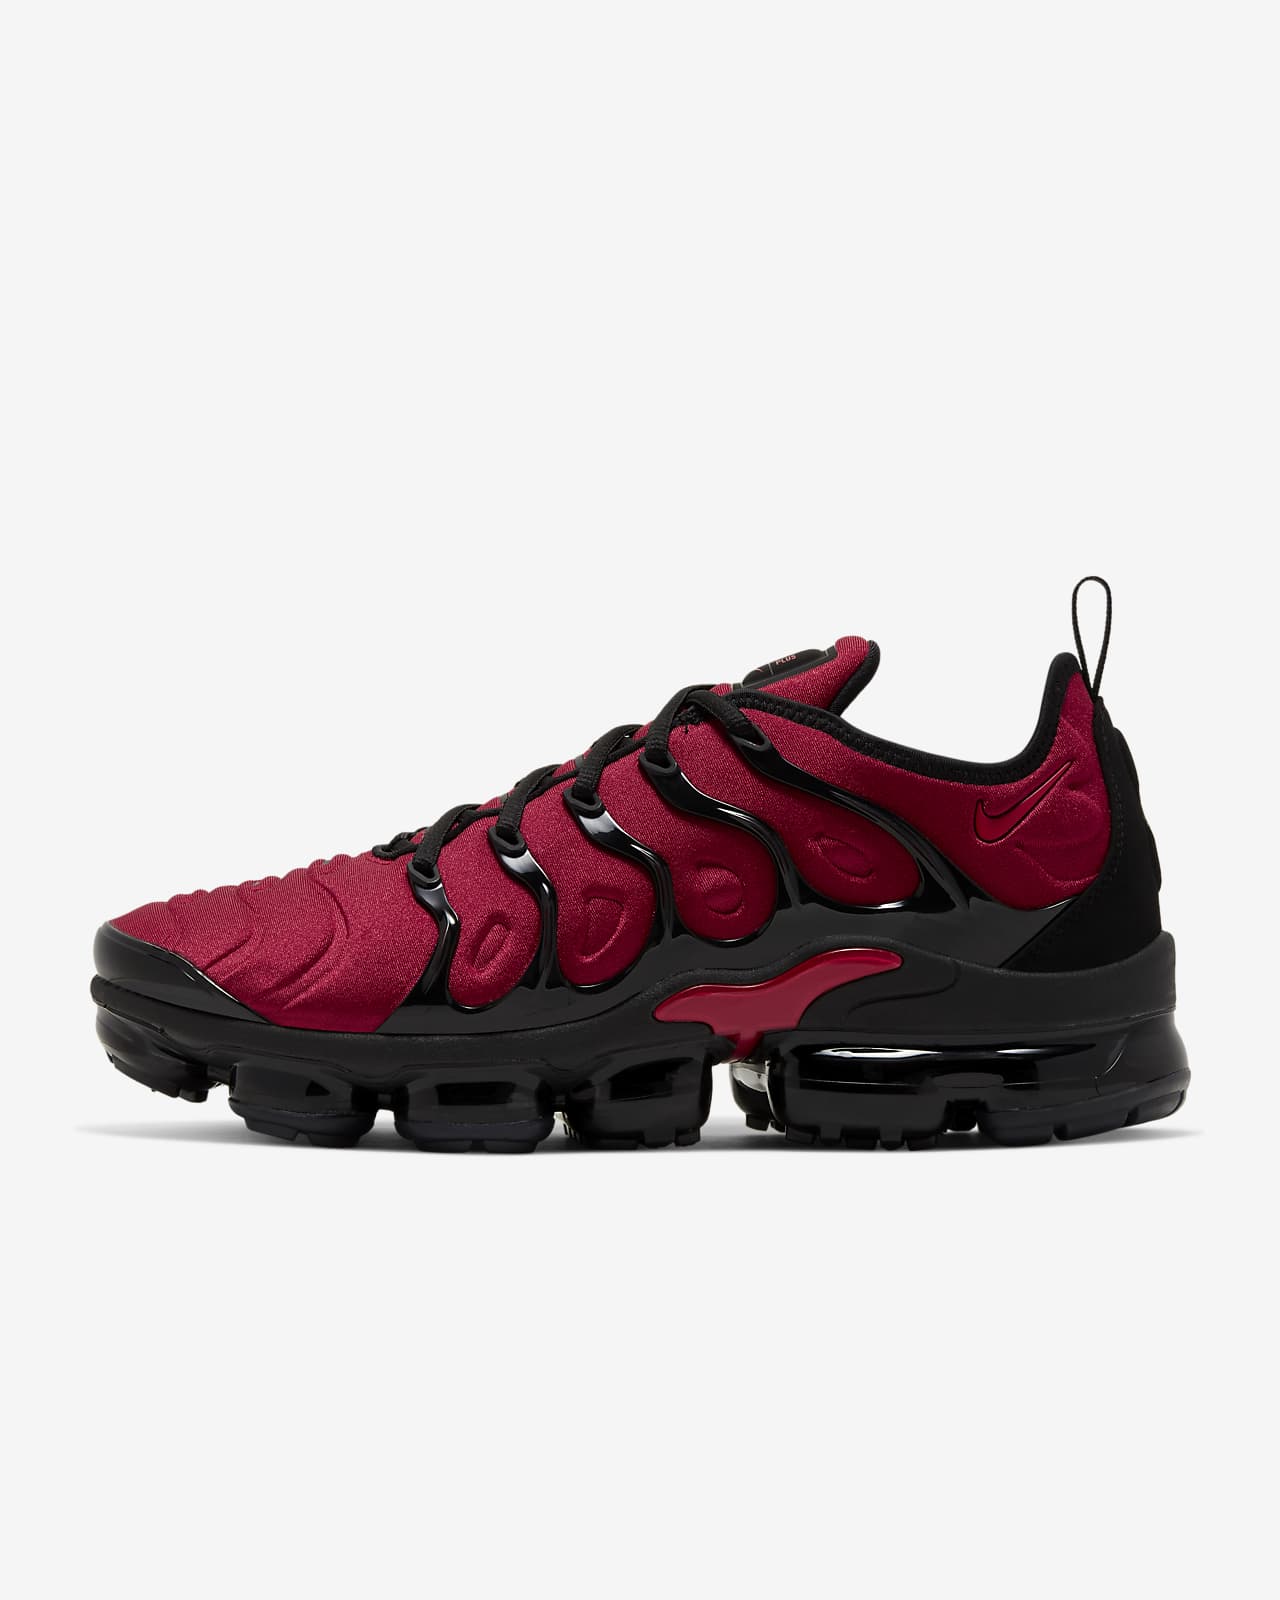 Nike Air Max Vapormax Tn Plus Online Sales, UP TO 65% OFF